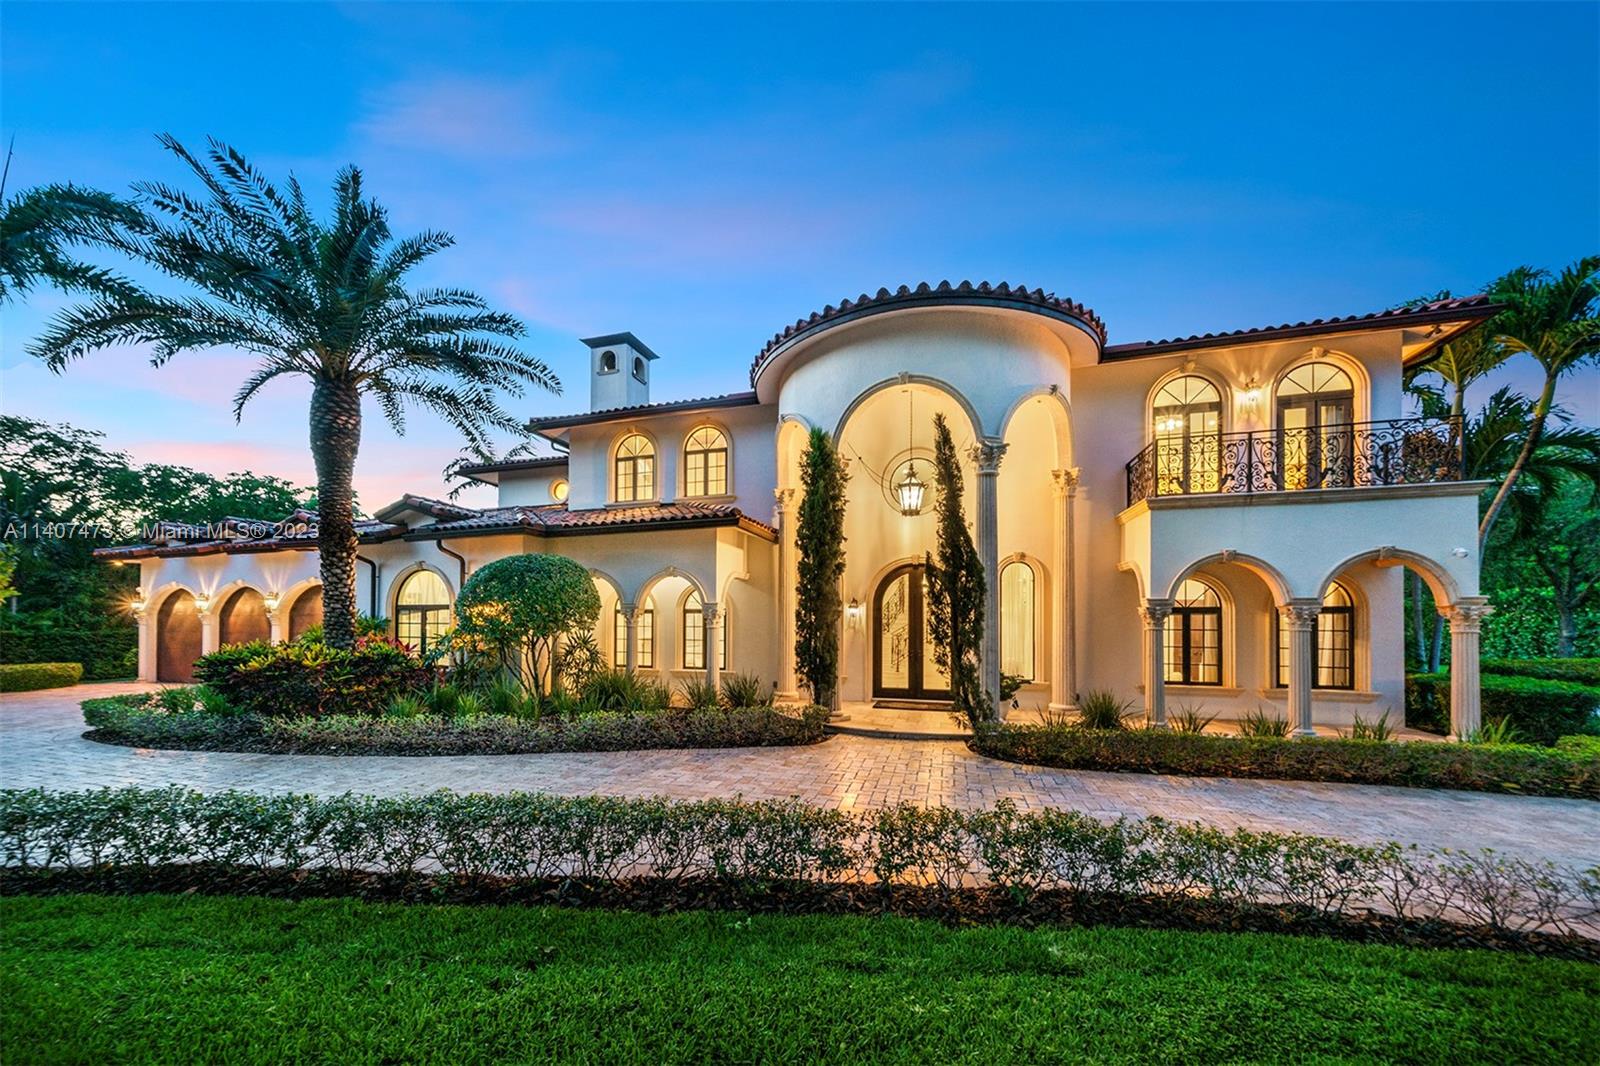 Elegant & Exquisite estate located in Pinecrest, enveloped by pristine landscaping & private gates. Completely renovated in 2013, this property offers volume ceilings, a grand foyer w/ an elegant staircase, & expansive living areas for entertaining. Discover 6 bedrms, 7/2 bathrms, + two lofts/playrm, home theatre, & recreational rm w/ a custom wet bar & wine cellar. Enjoy a gourmet kitchen w/ butler’s pantry, breakfast area & large family rm to enhance the experience. The master suite impresses w/ a sitting room, spa-like bath w/ a gas fireplace, & a private terrace w/ staircase overlooking the outdoor oasis. Outdoor living is exceptional w/ a covered terrace, summer kitchen, pool/spa, ample grounds, and a half basketball court. Add’l features: impact win/drs, a 3-car gar, & generator.